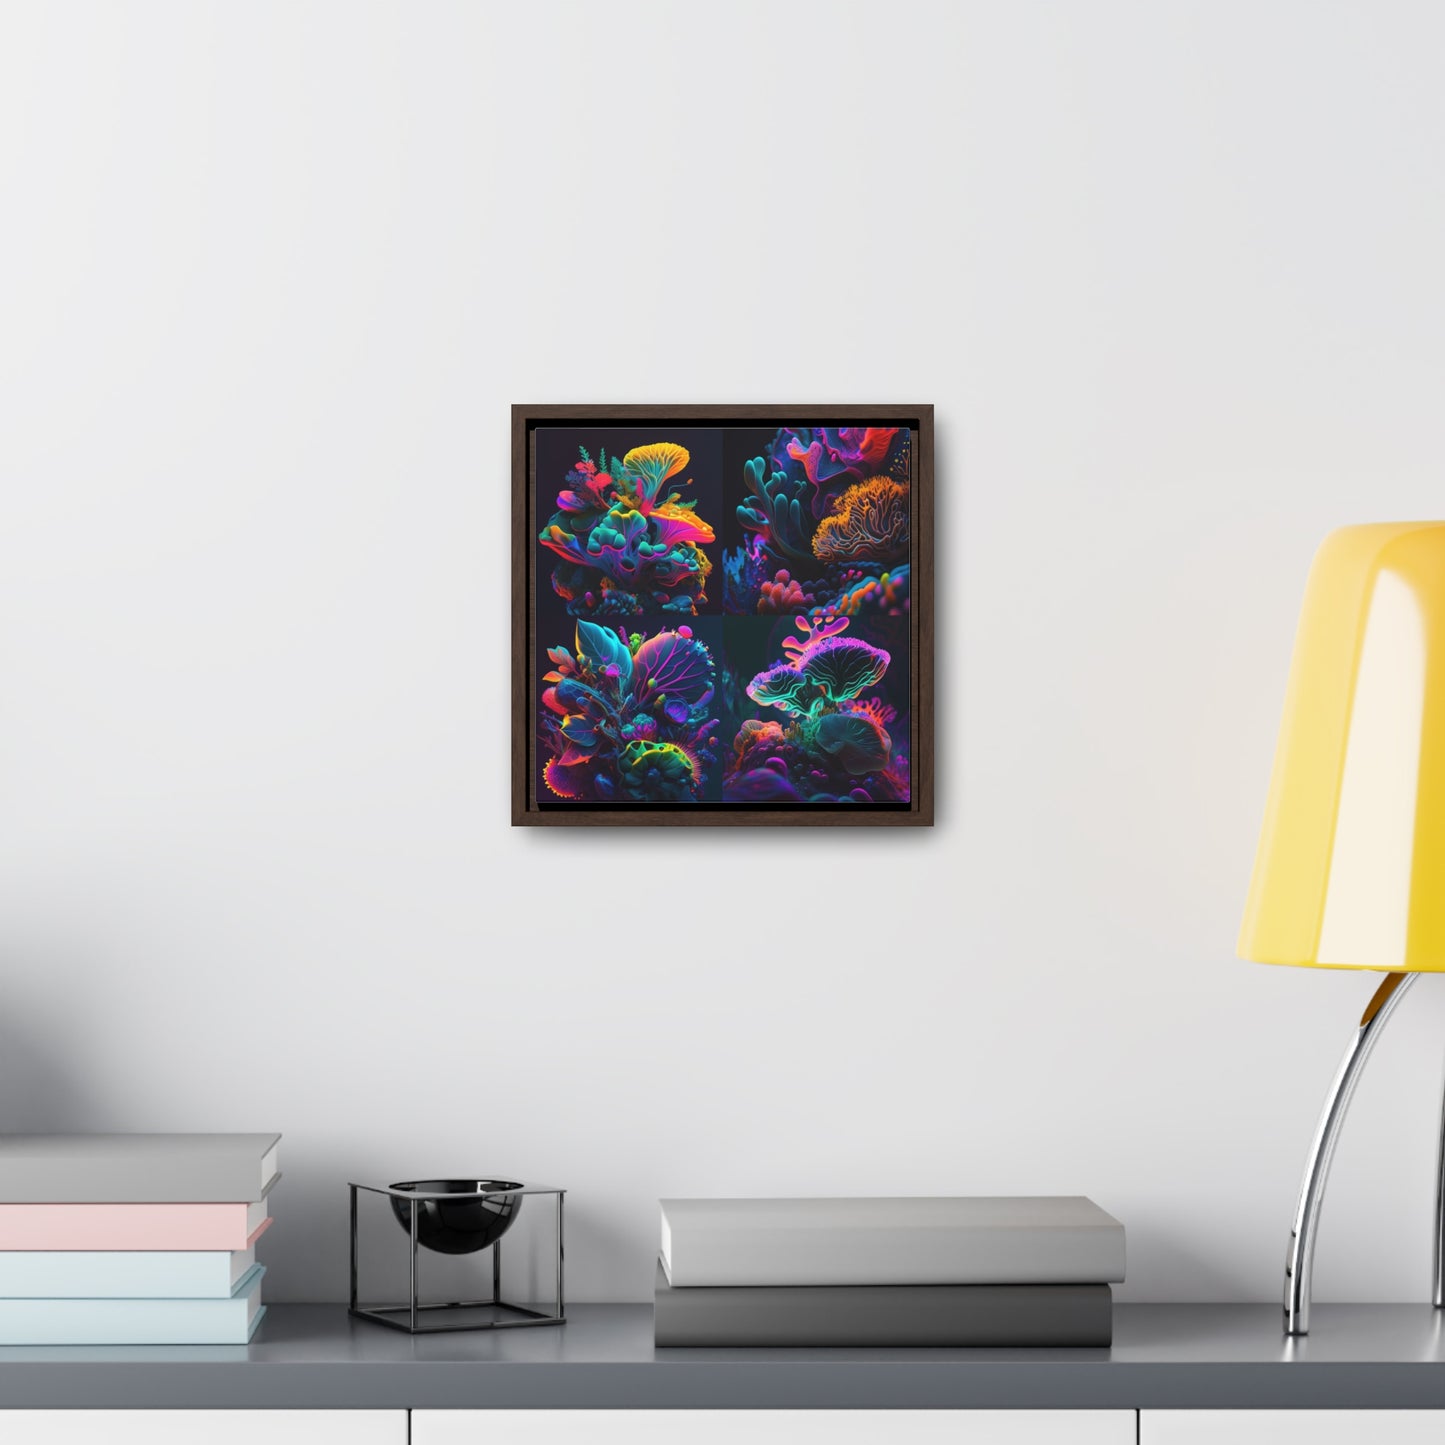 Gallery Canvas Wraps, Square Frame Macro Coral Reef 5